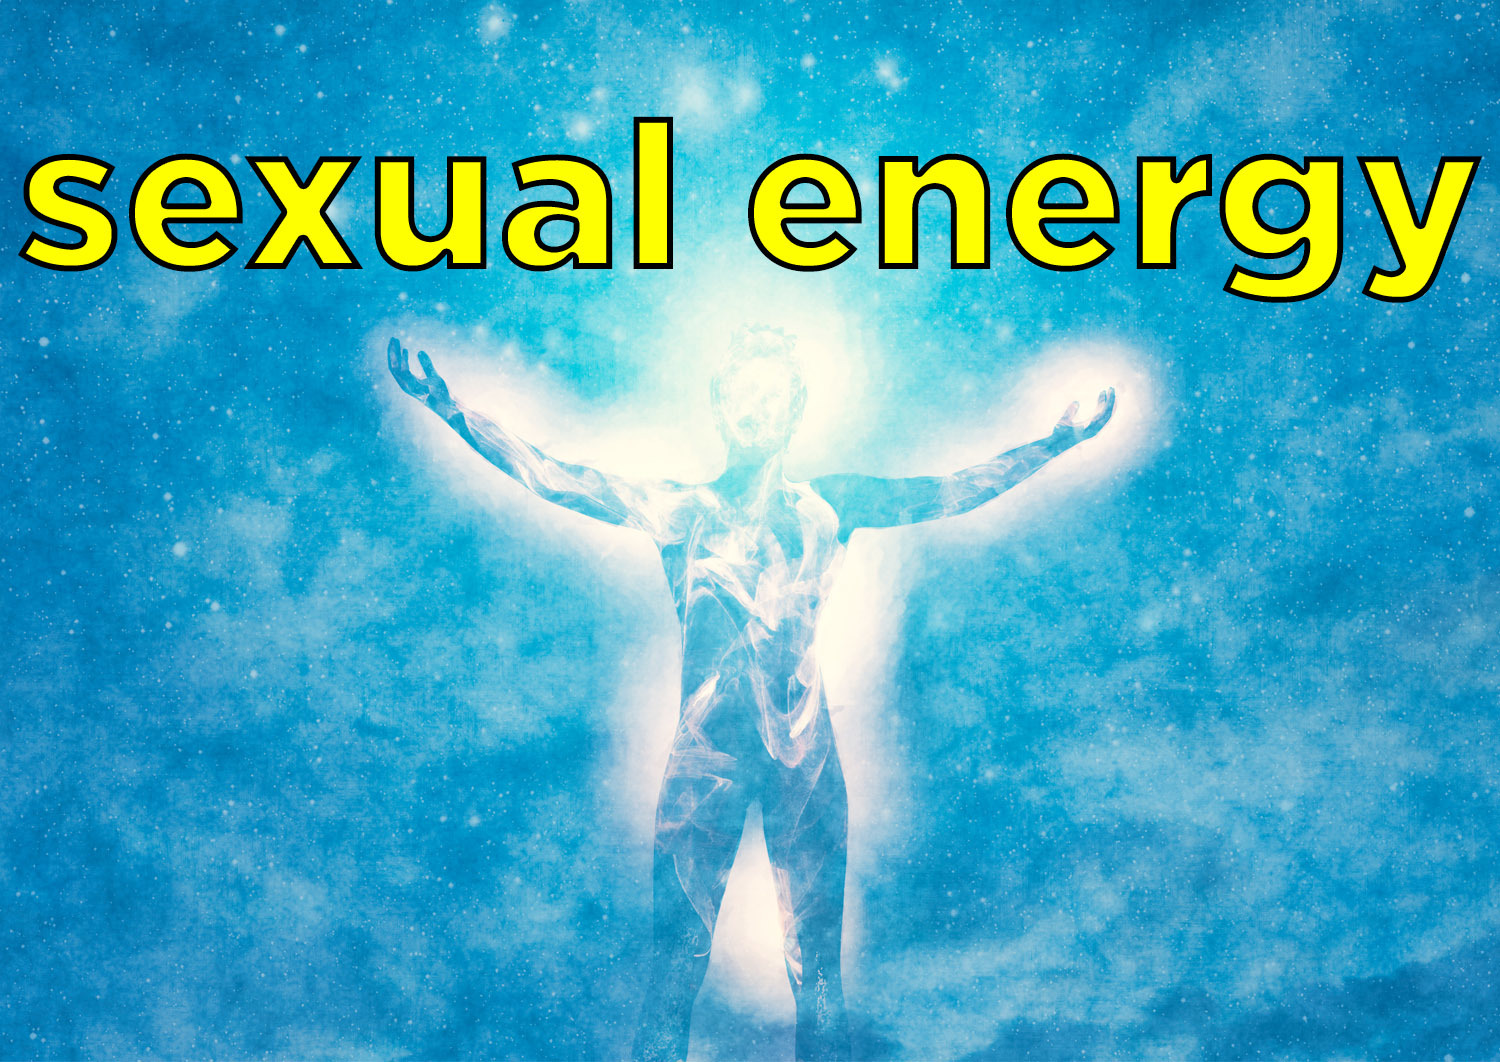 How To Manifest Using Sexual Energy In 5 Steps